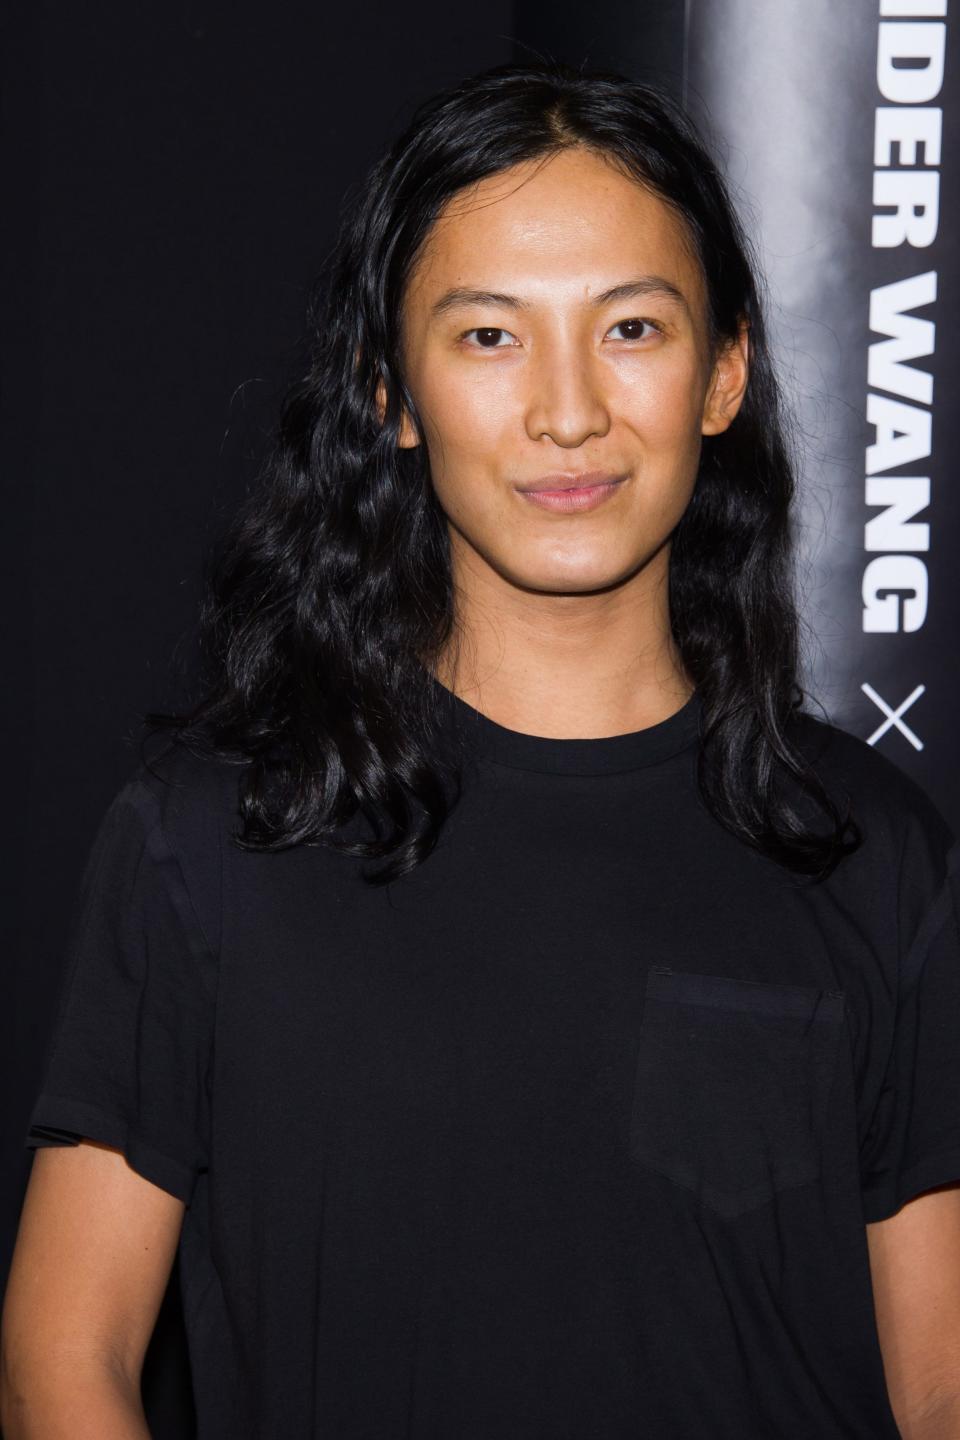 Alexander Wang faced sexual-assault allegations in 2020.